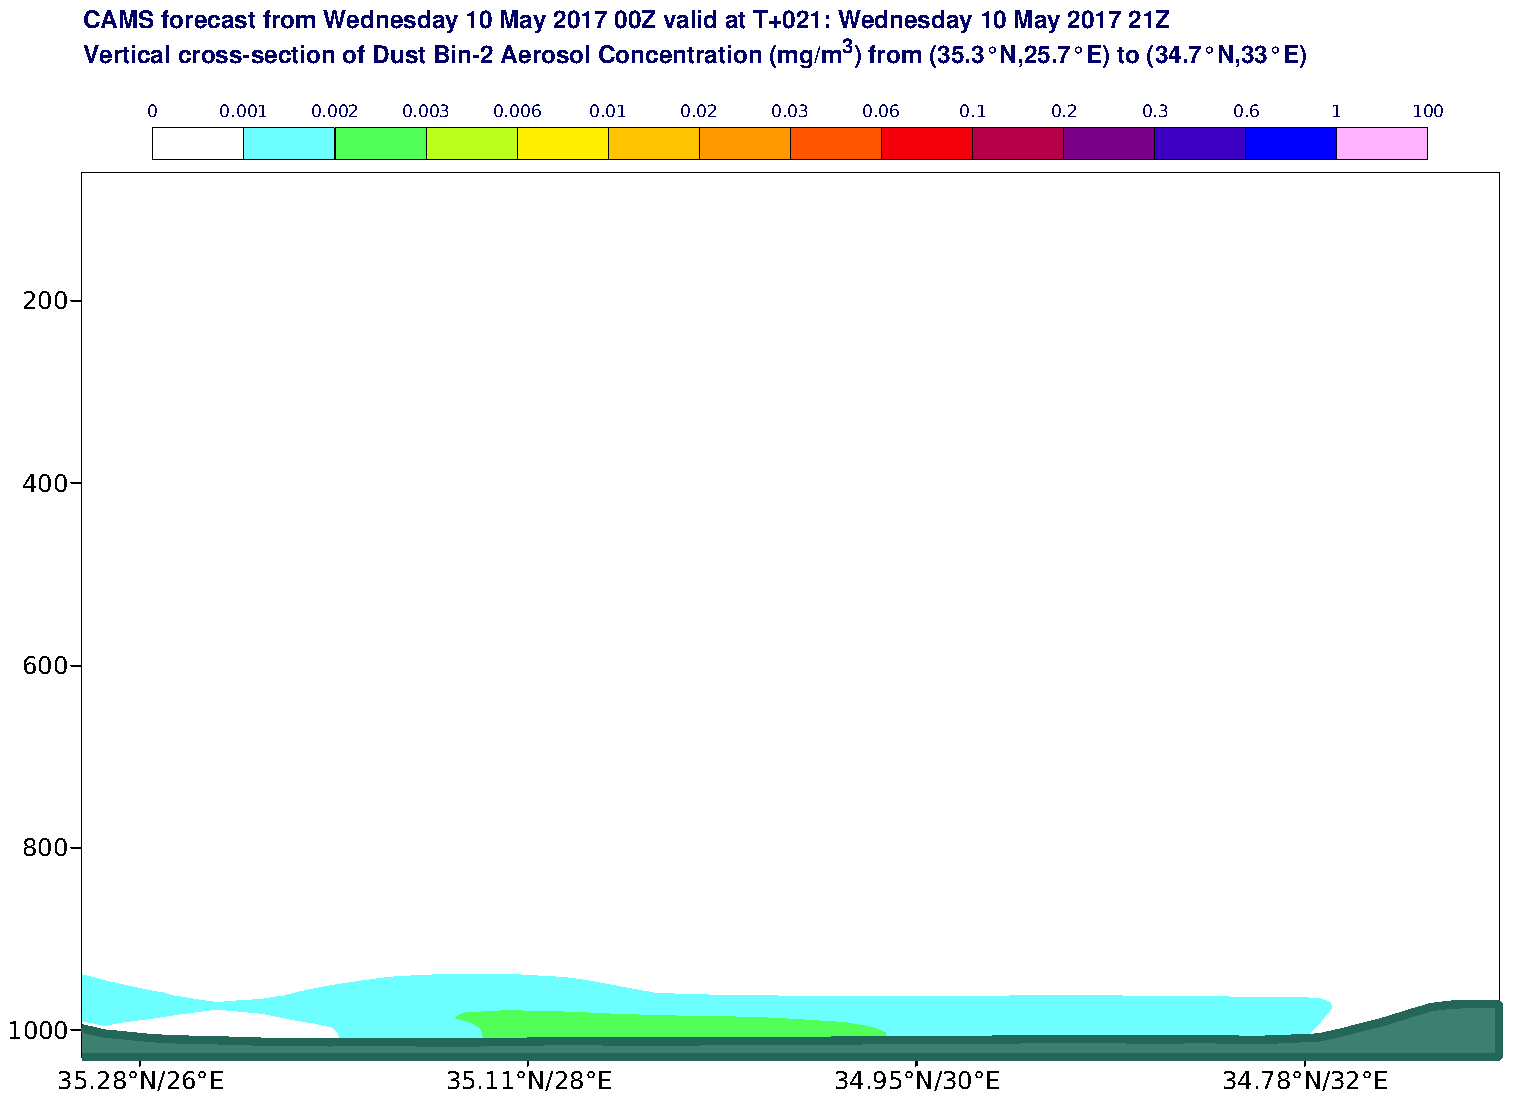 Vertical cross-section of Dust Bin-2 Aerosol Concentration (mg/m3) valid at T21 - 2017-05-10 21:00